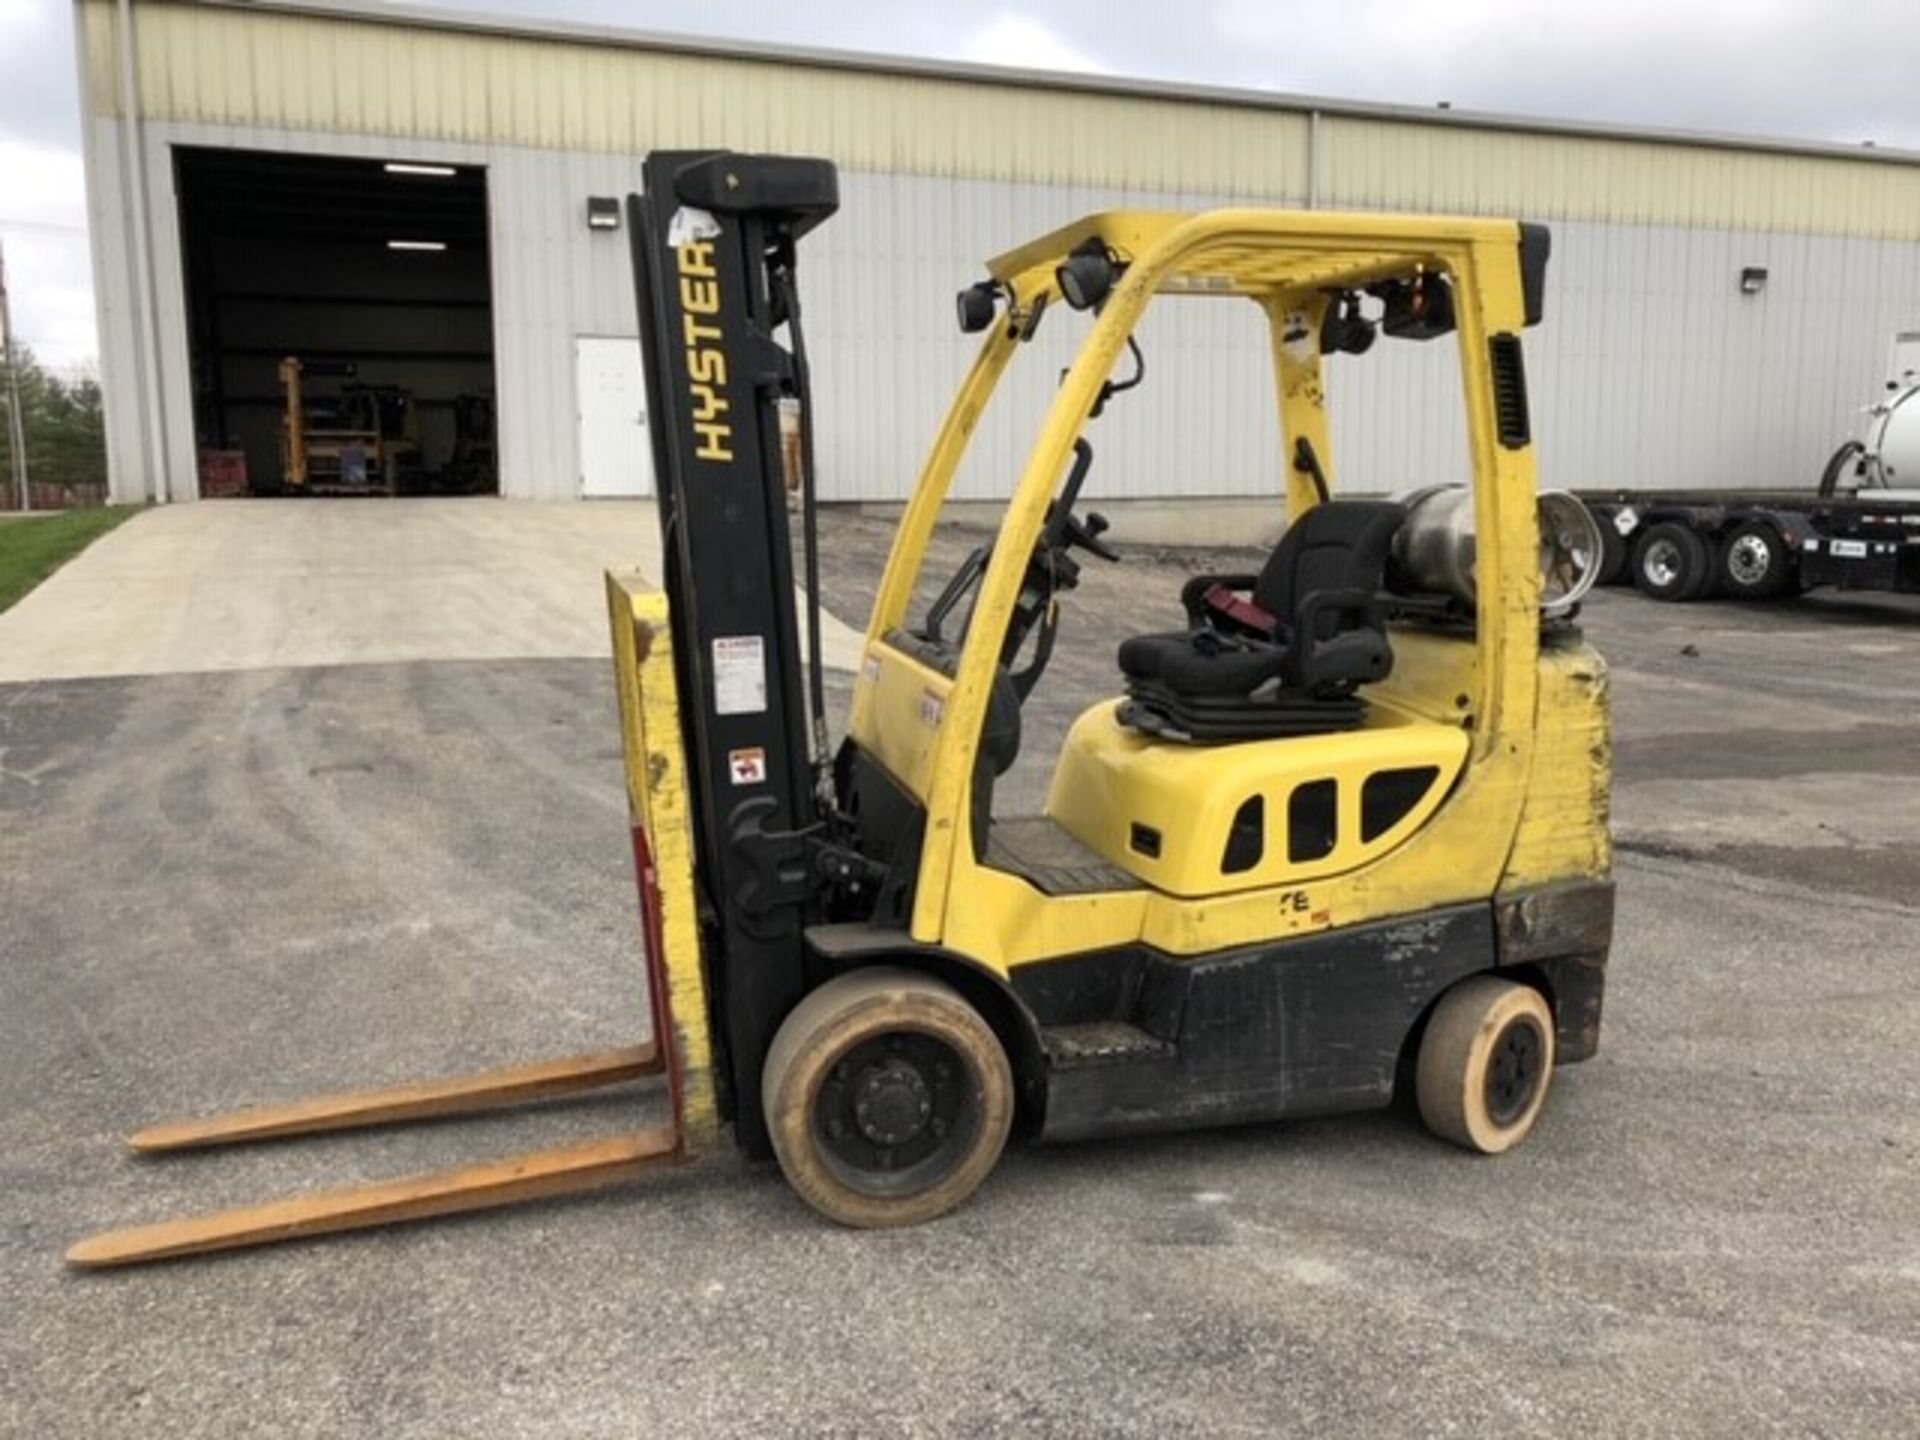 2016 HYSTER 6,000 LB. CAPACITY FORKLIFT, MODEL S60FT, LPG, S/N H187V05489P, 3-STAGE MAST, SOLID TIRE - Image 2 of 5